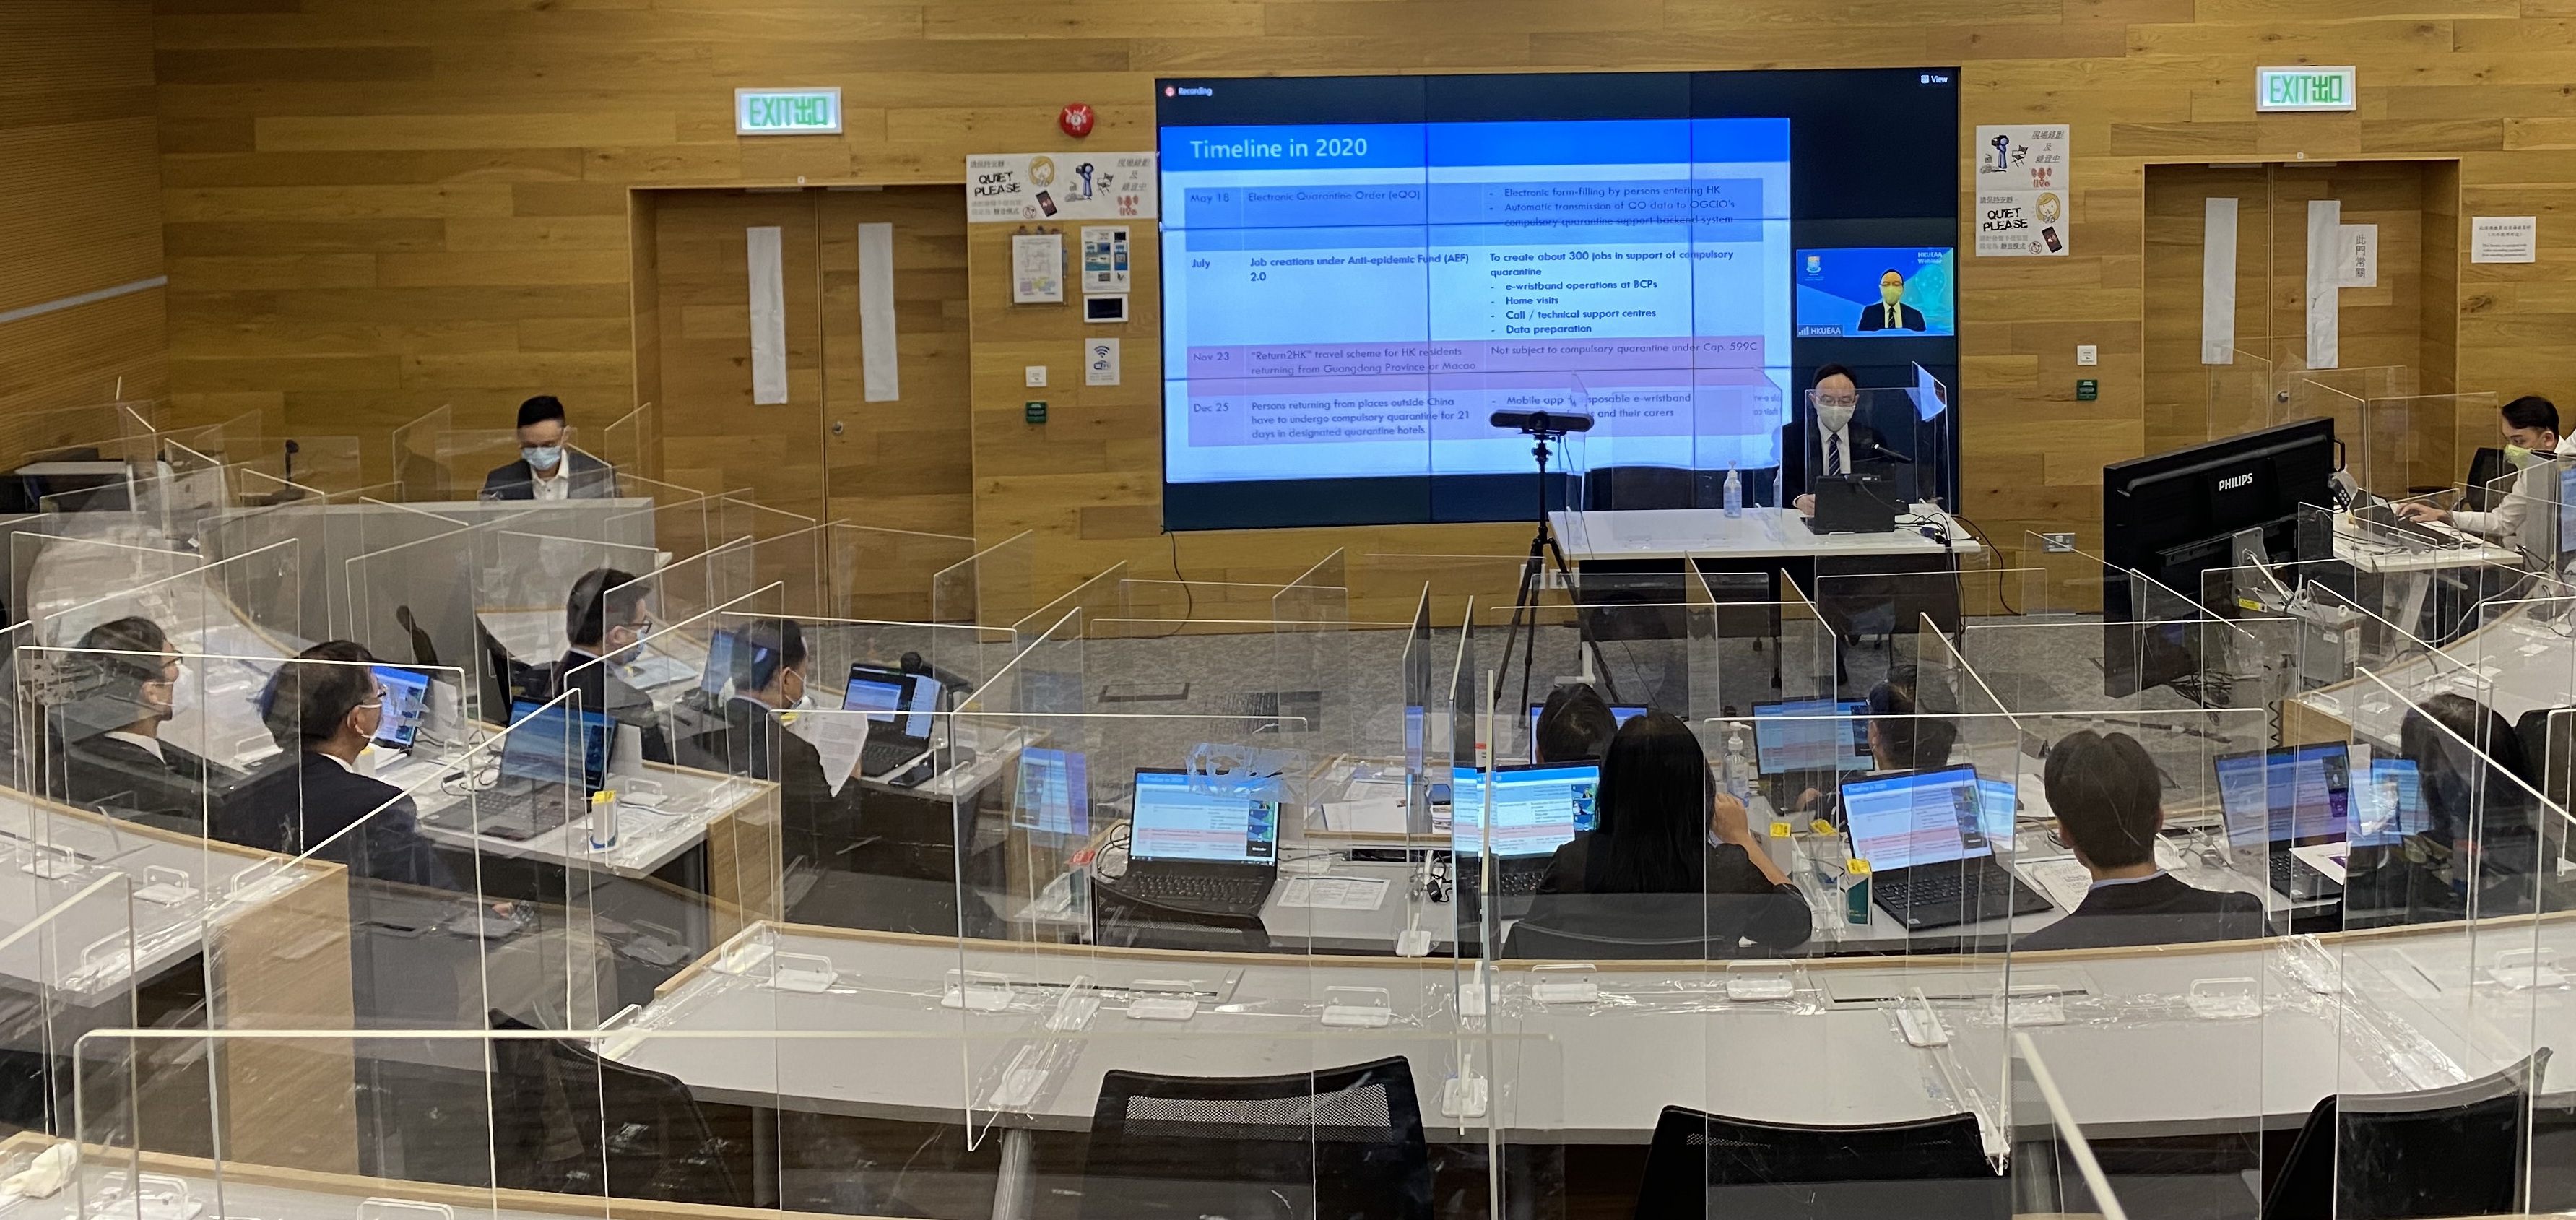 Mr. Victor Lam, Government Chief Information Officer delivered presentation on “A Smarter Government under COVID-19 and Beyond” at the “HKU Engineering Alumni Association (HKUEAA) Webinar - Engineer's Contributions in Combating COVID-19 : Engineering a Better Way by Innovation and Technology”.